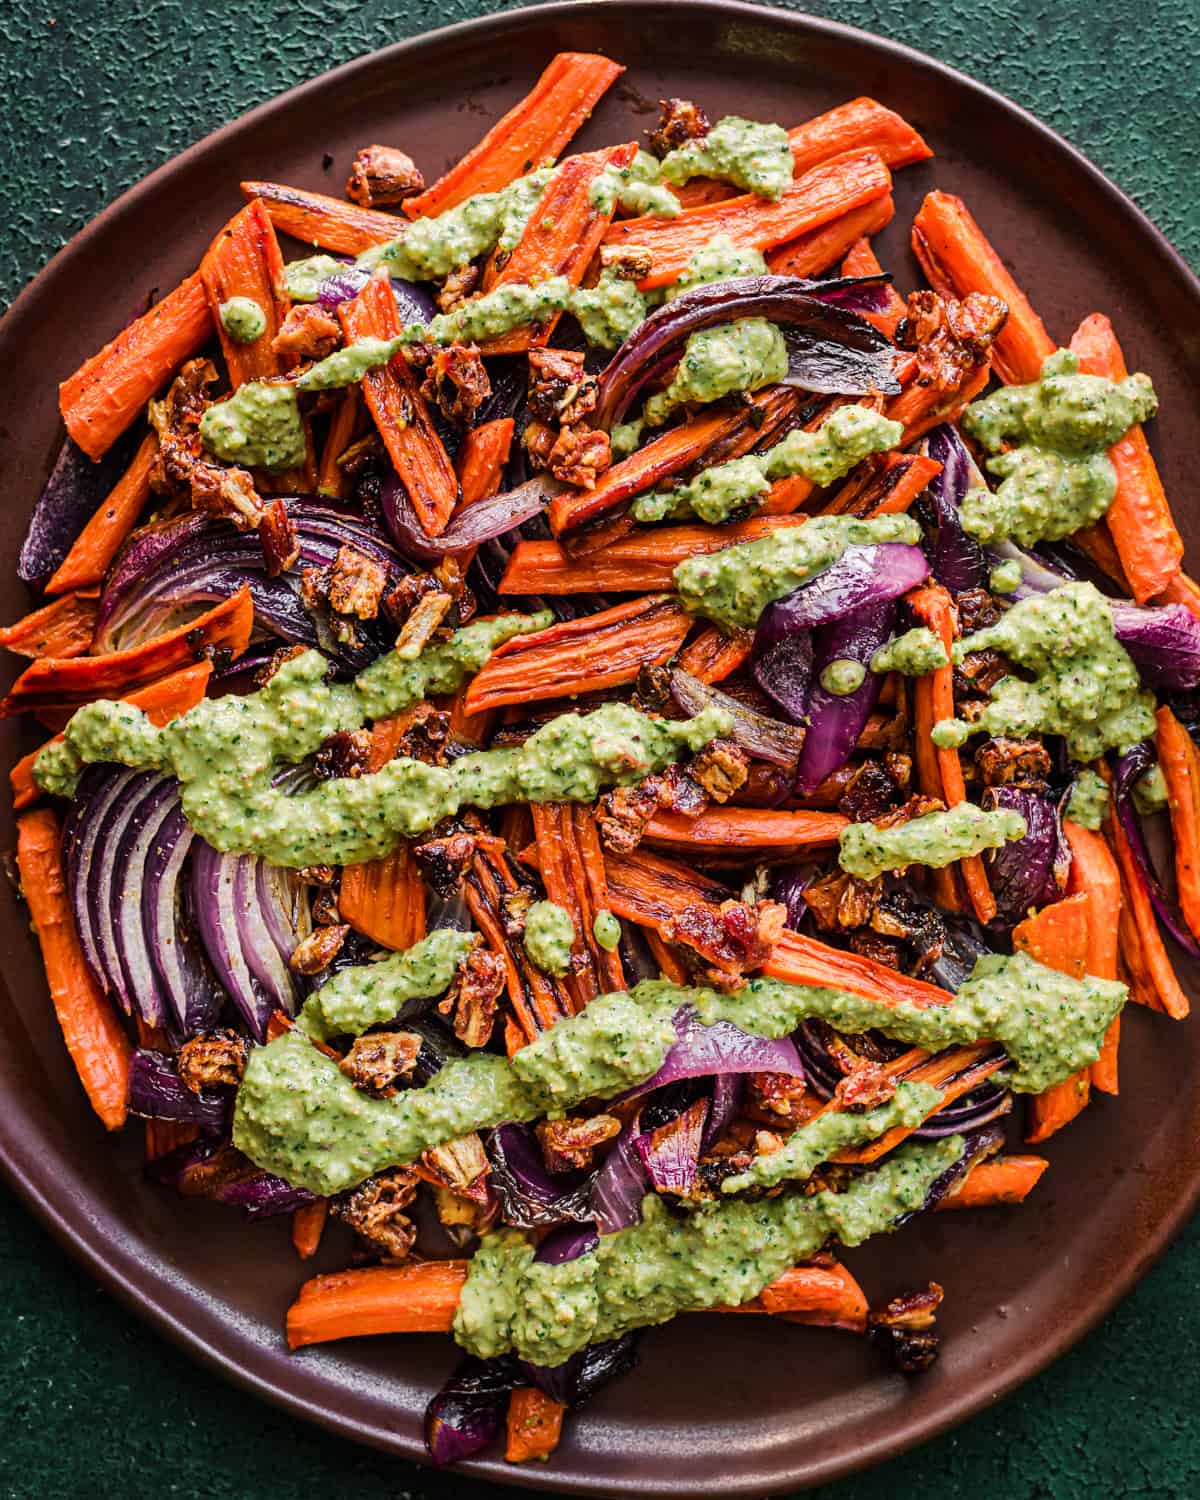 Pesto added to the carrots, onions and dates on a plate.